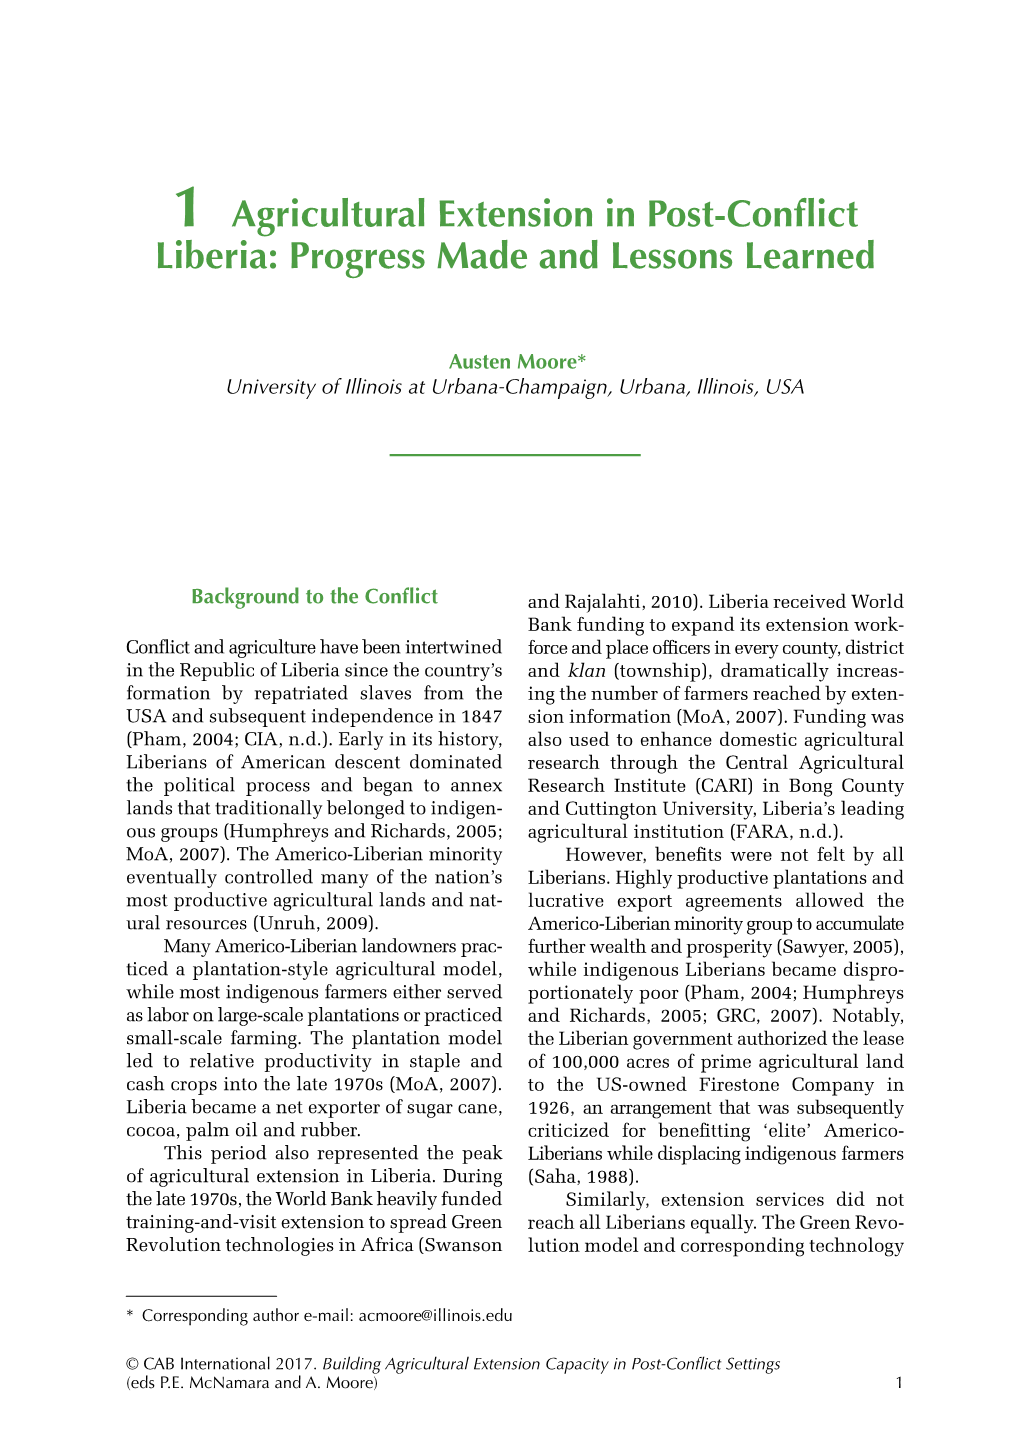 1 Agricultural Extension in Post-Conflict Liberia: Progress Made and Lessons Learned